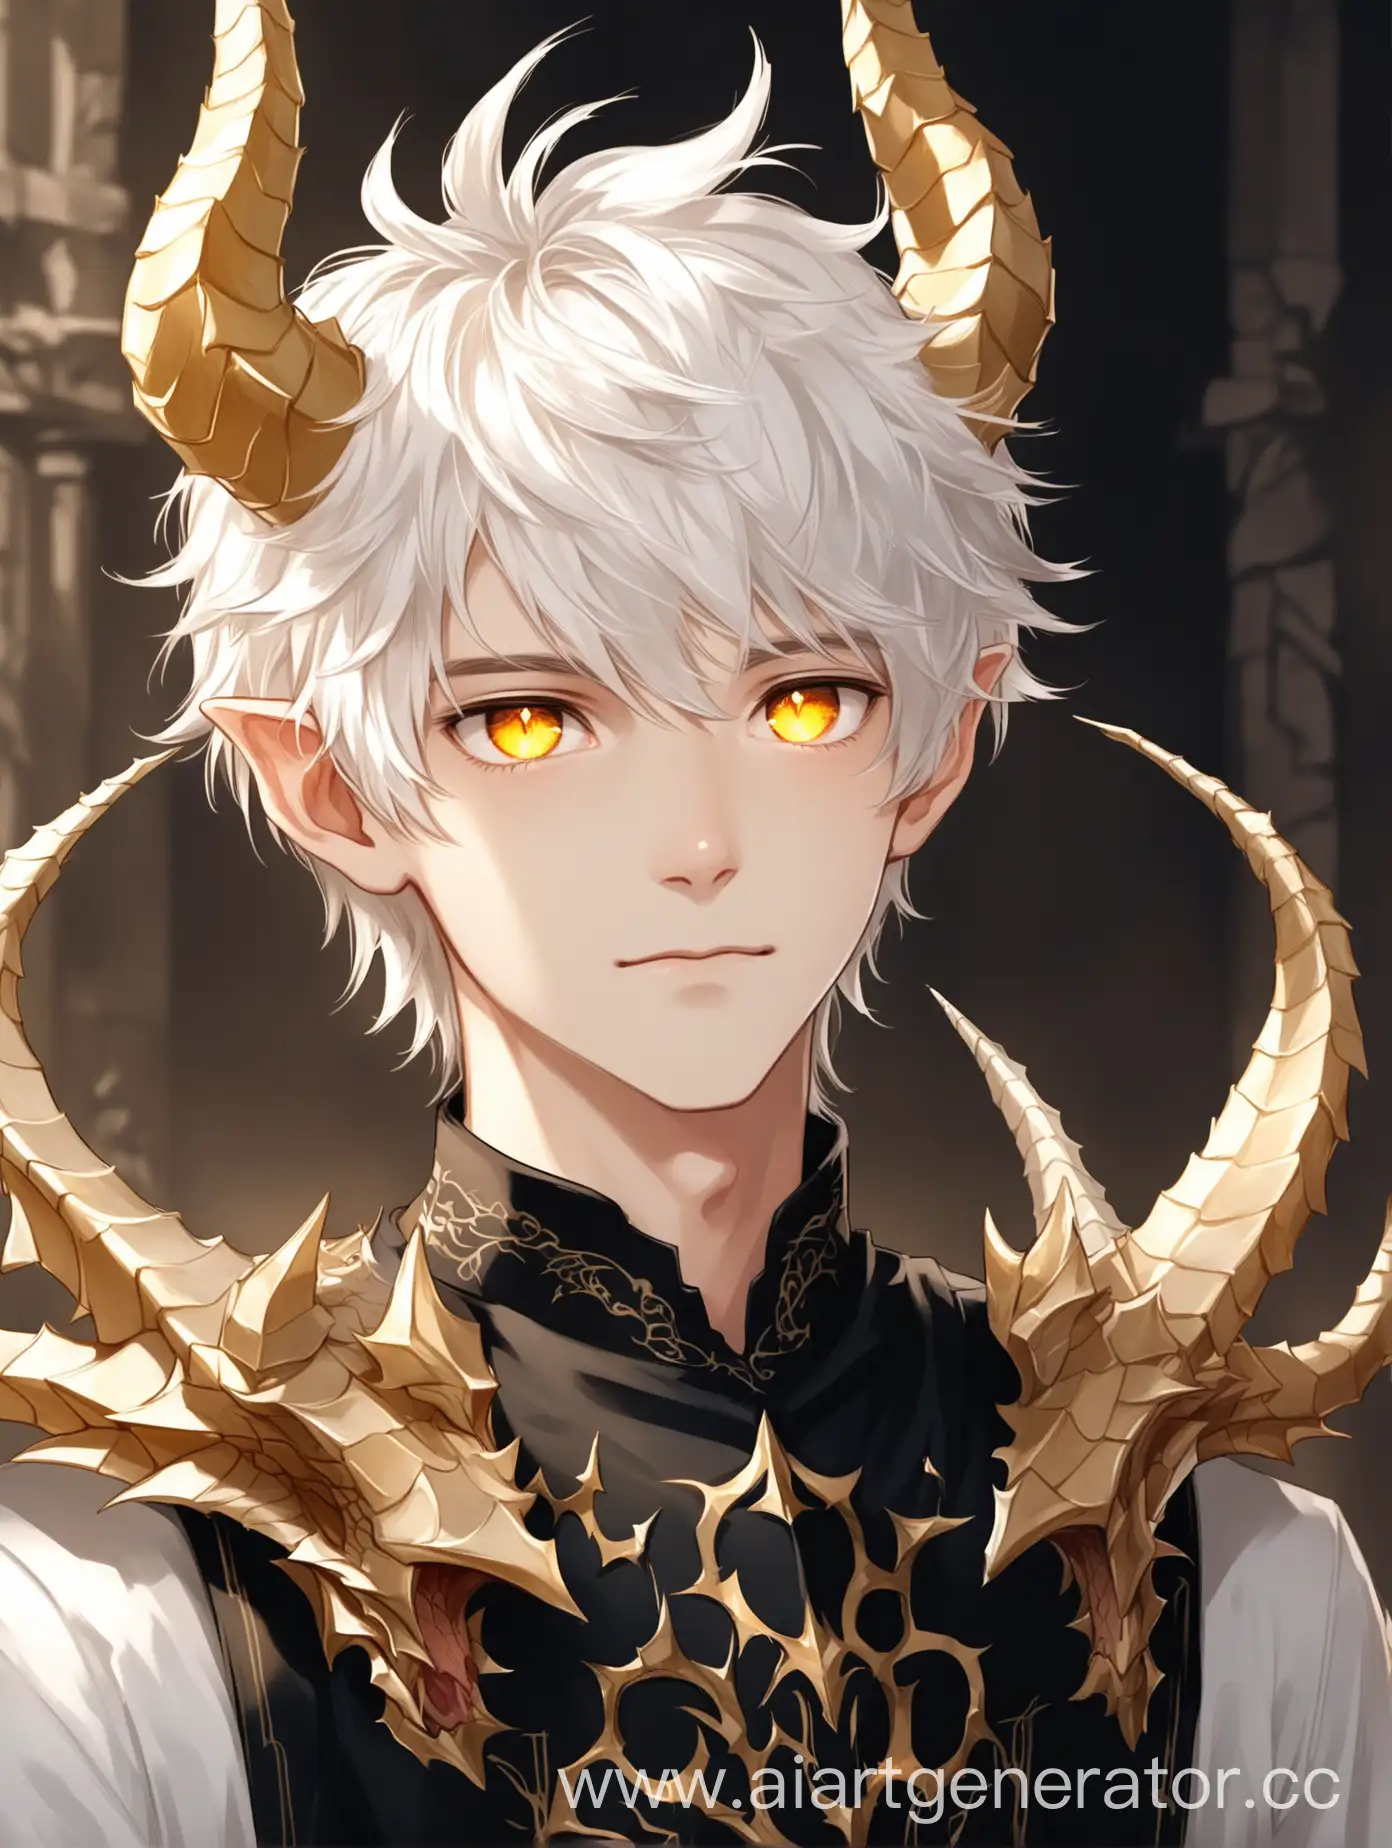 twink. A handsome young man with a fragile build. Golden eyes and white hair. Medium length hair. Cute face. Kind face. Charming guy. There are two dragon horns on the head. Half-dragon